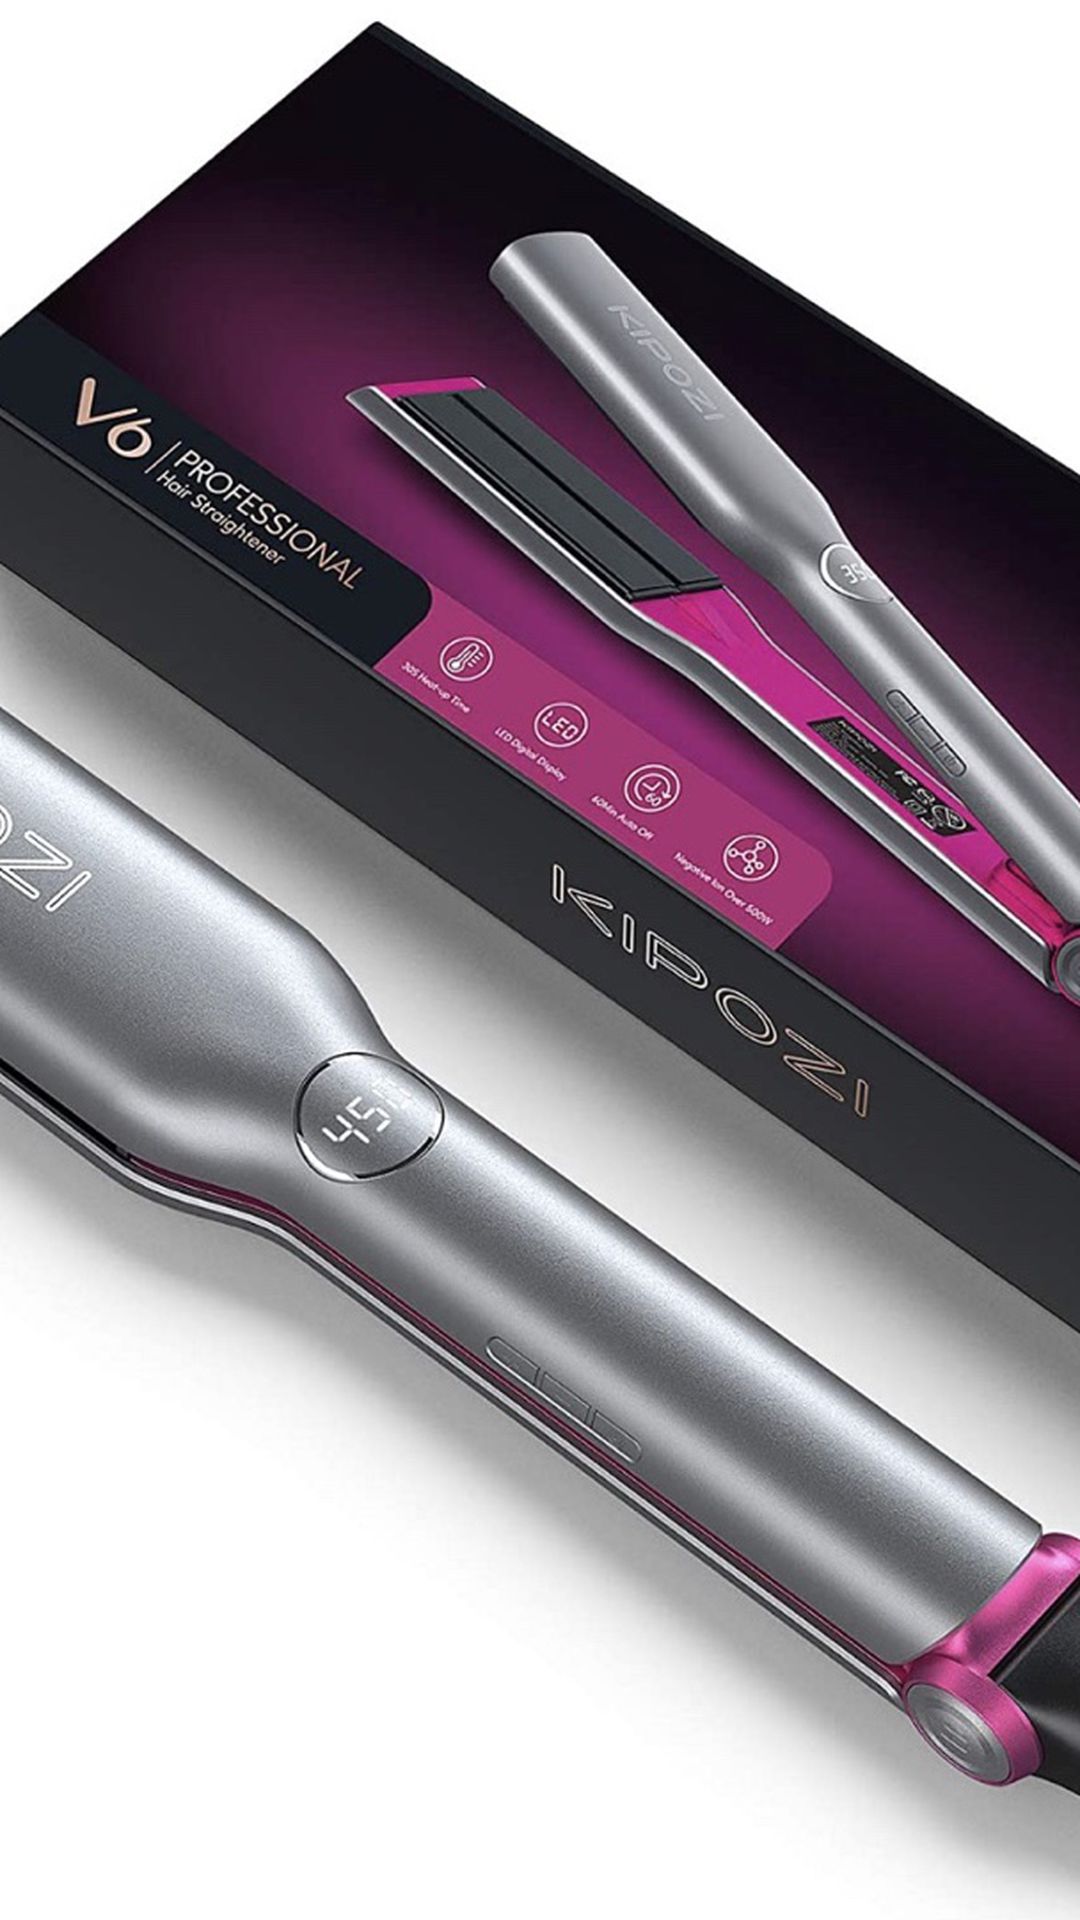 KIPOZI Professional Ionic Hair Straightener, 1.75 Inch Wide Flat Iron with Advanced Ionic Technology, Titanium Flat Iron for Hair Ionic Straightener w